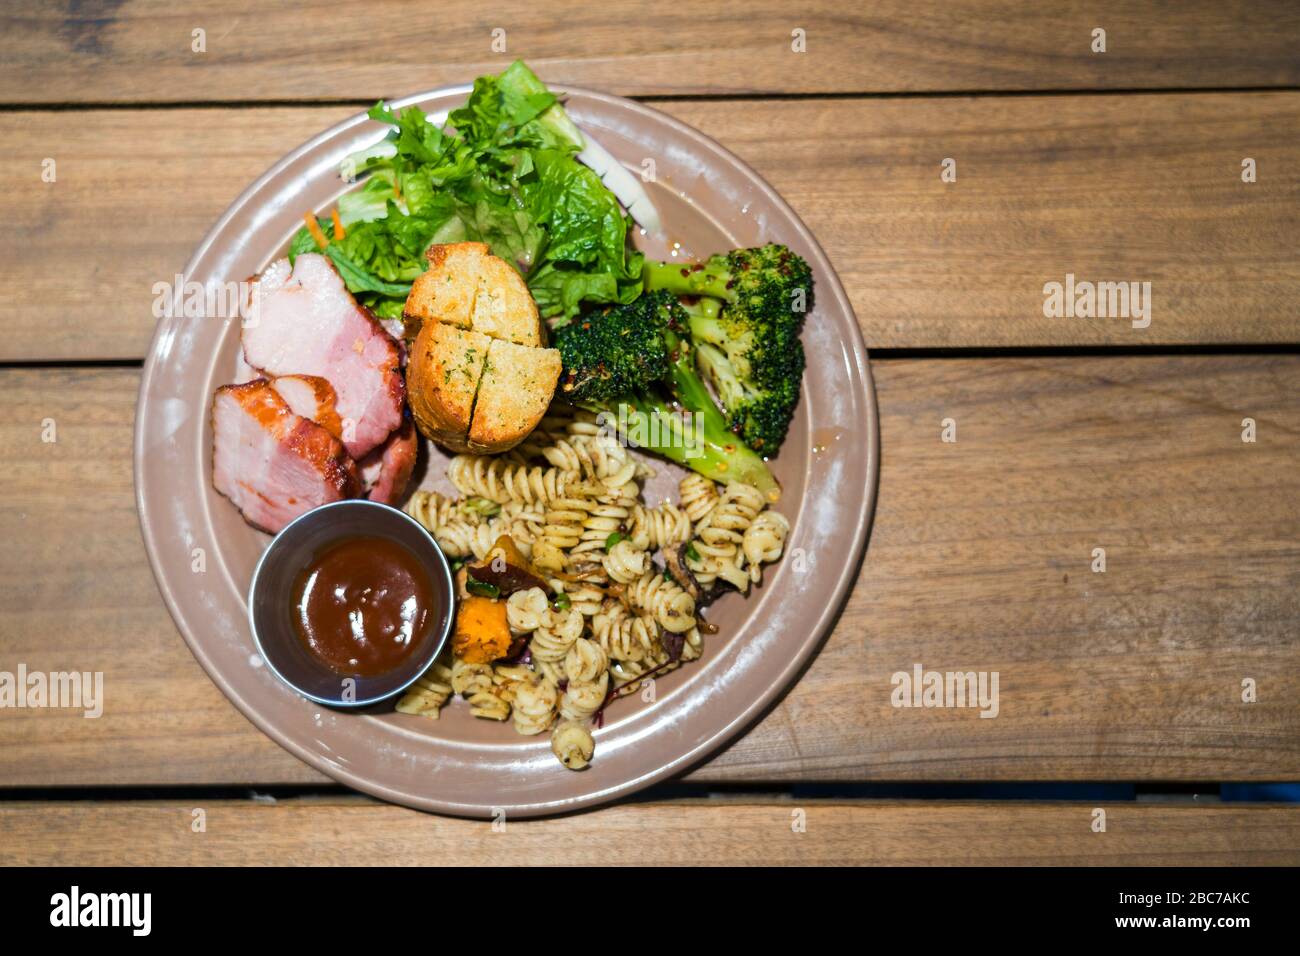 Top view image of healthy diet food. Grilled fusilli pasta and broccoli, meat, garlic bread, vegetables on a plate. Stock Photo